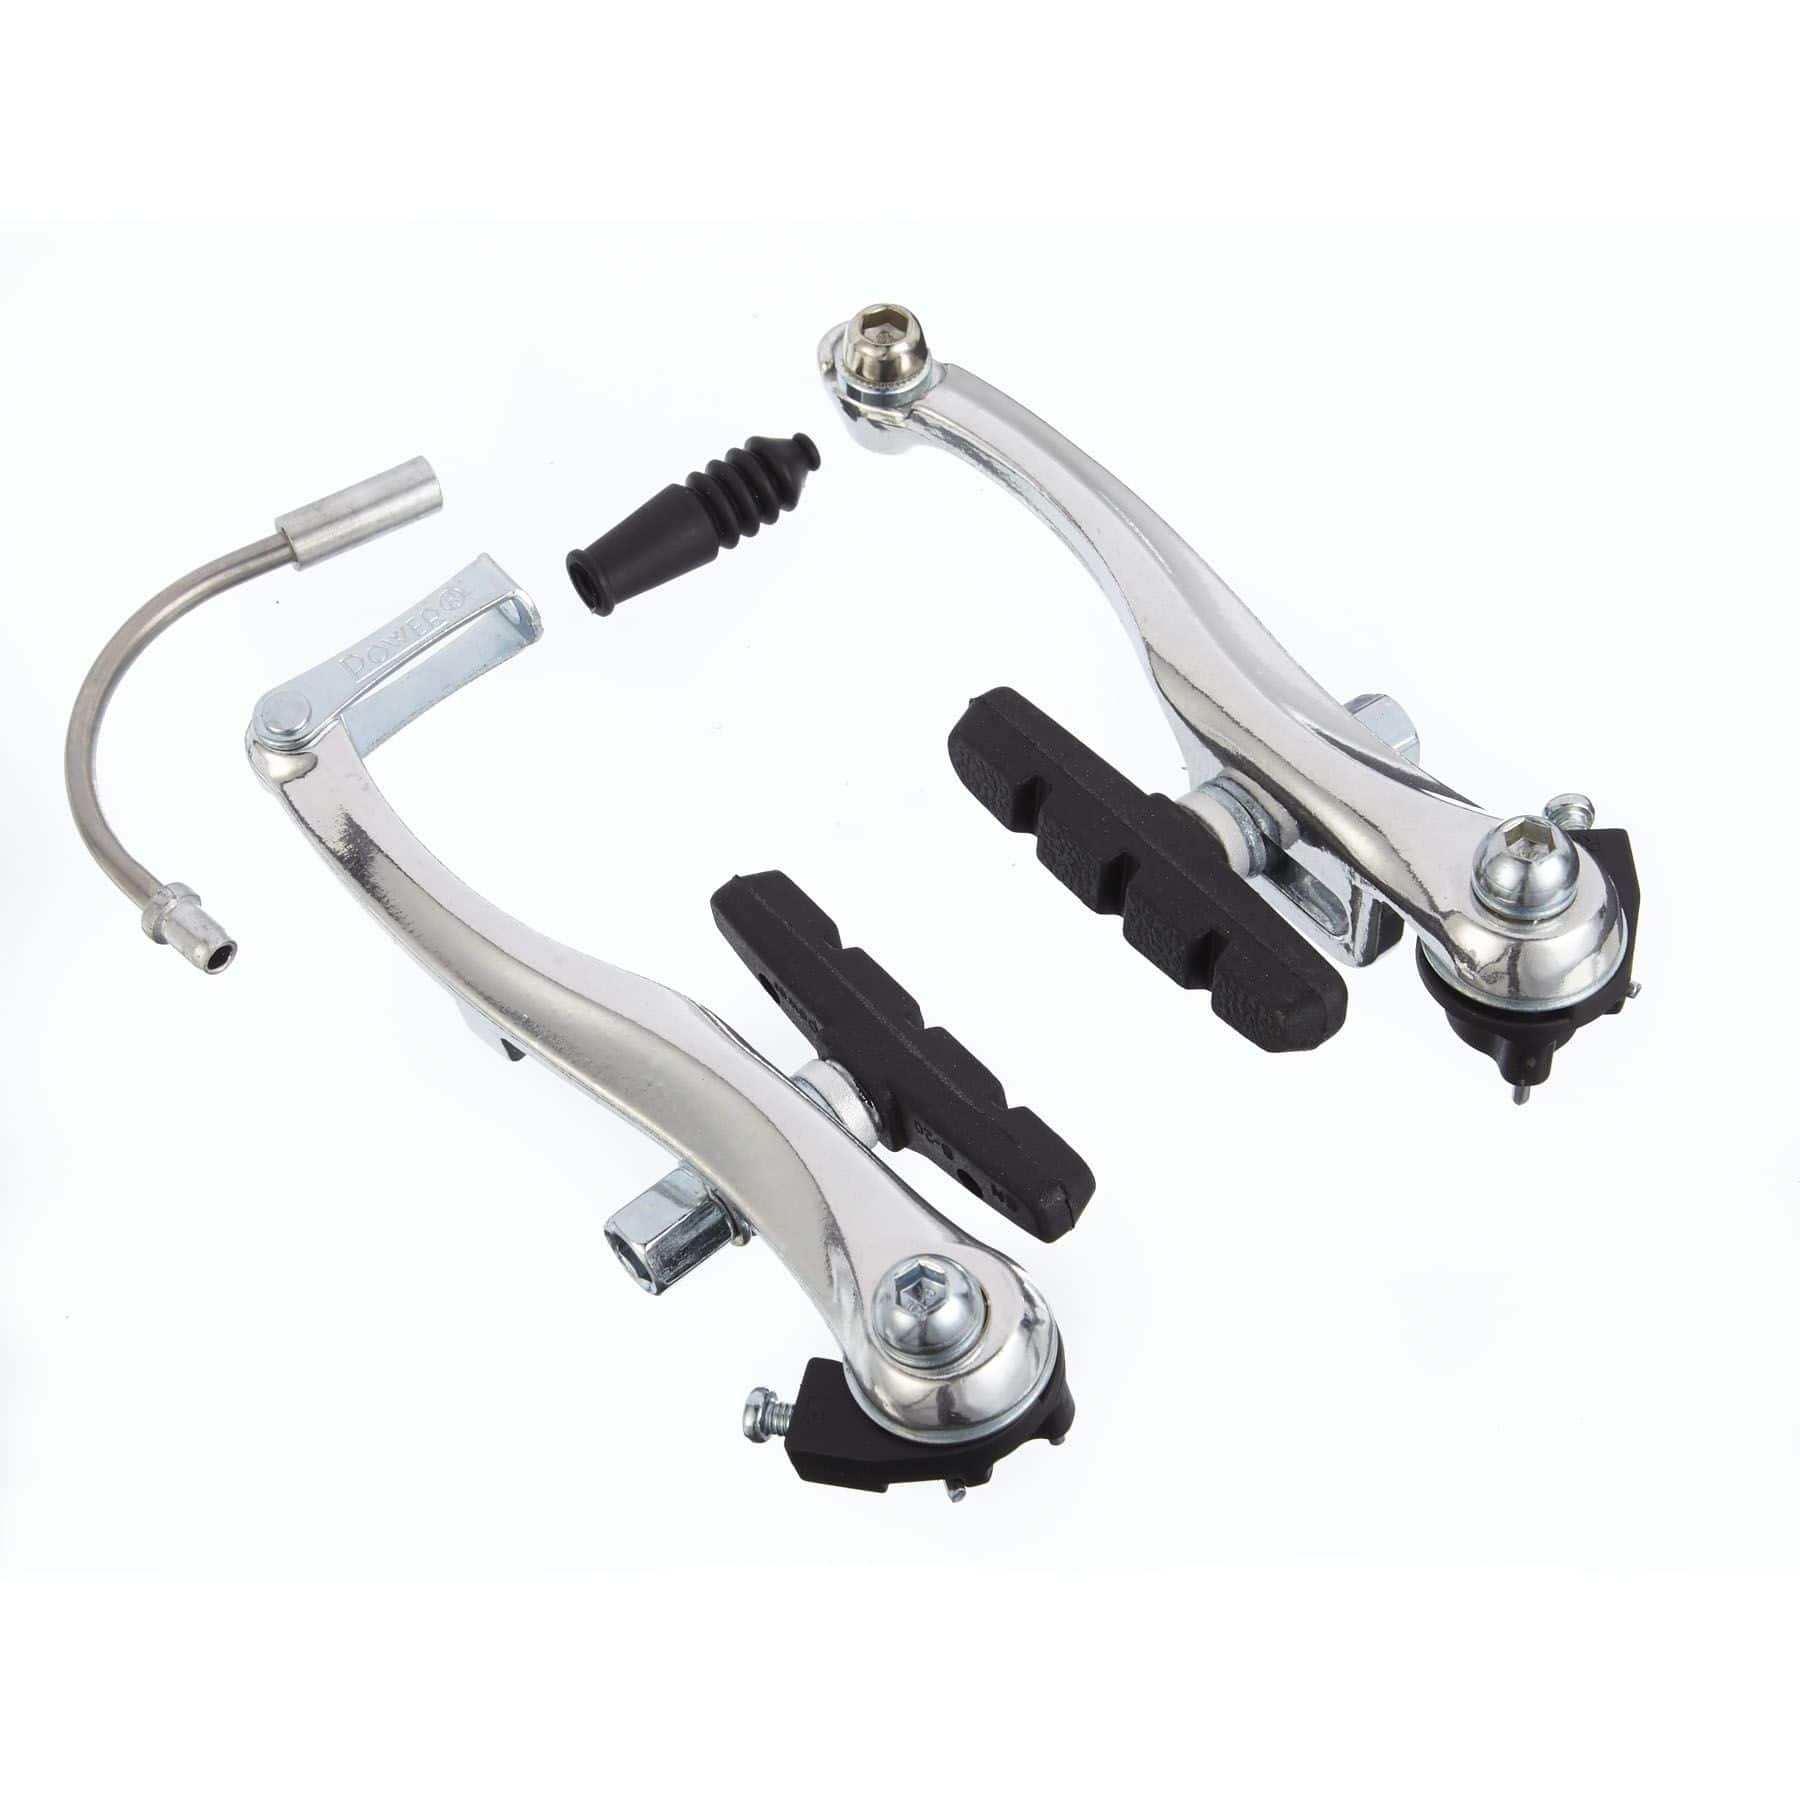 https://media-www.canadiantire.ca/product/playing/cycling/bicycle-accessories/0737425/supercycle-v-type-bike-brake-set-and-pads-d0f19e92-8421-4b5b-a448-13e7431e24d0-jpgrendition.jpg